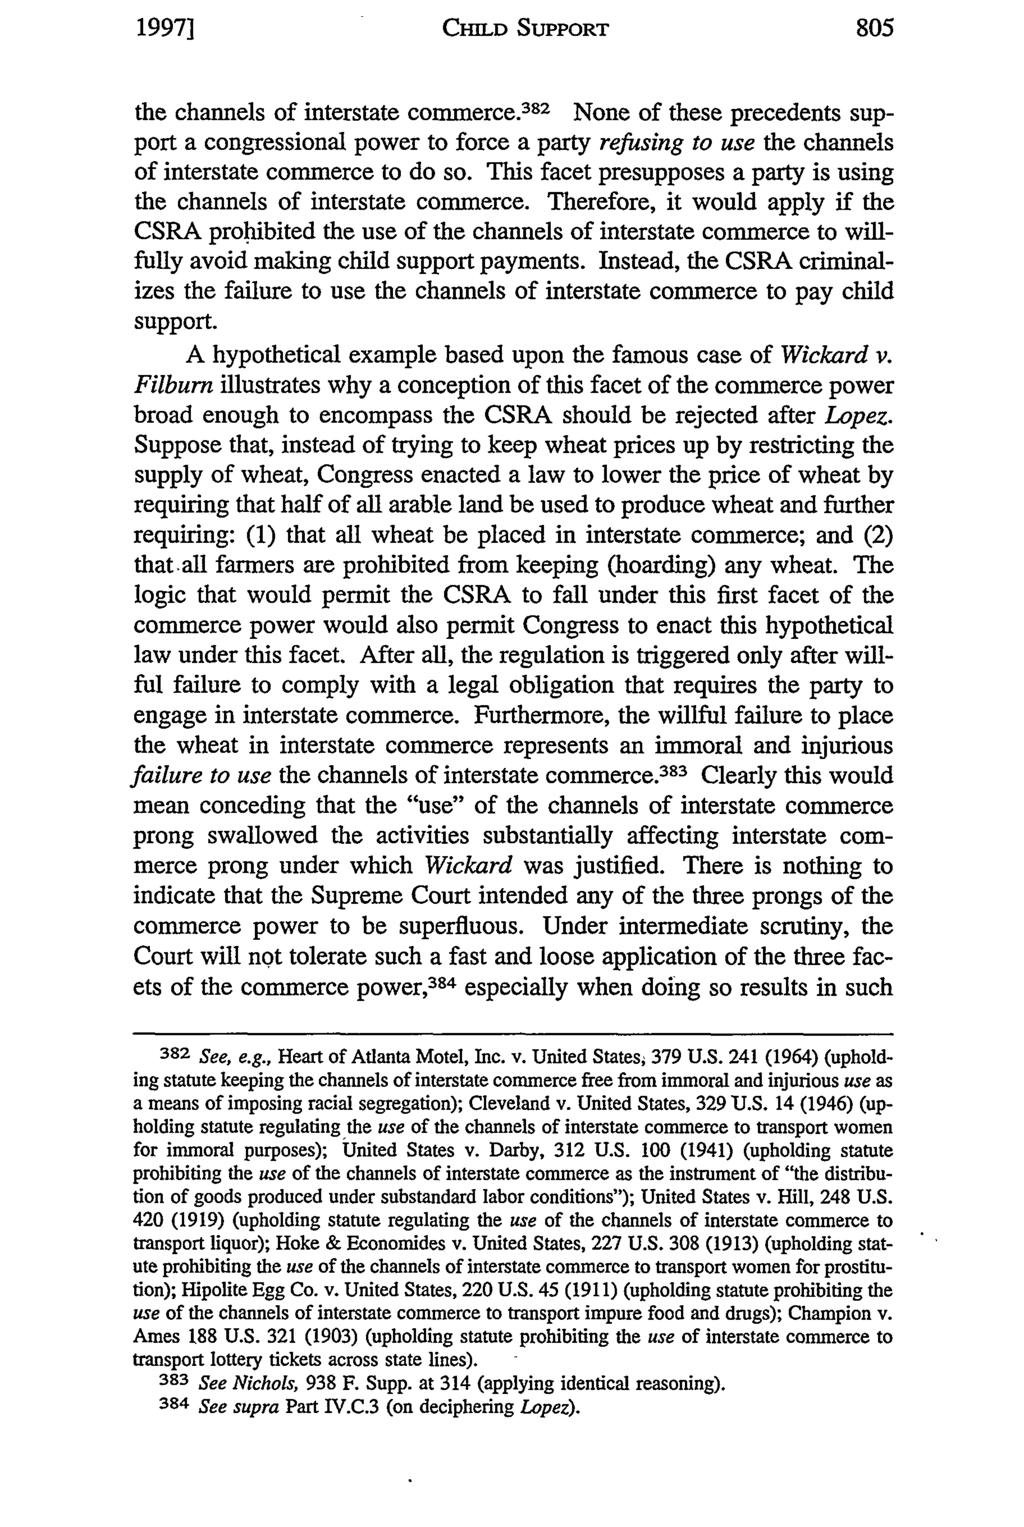 1997] CHILD SUPPORT the channels of interstate commerce. 382 None of these precedents support a congressional power to force a party refusing to use the channels of interstate commerce to do so.